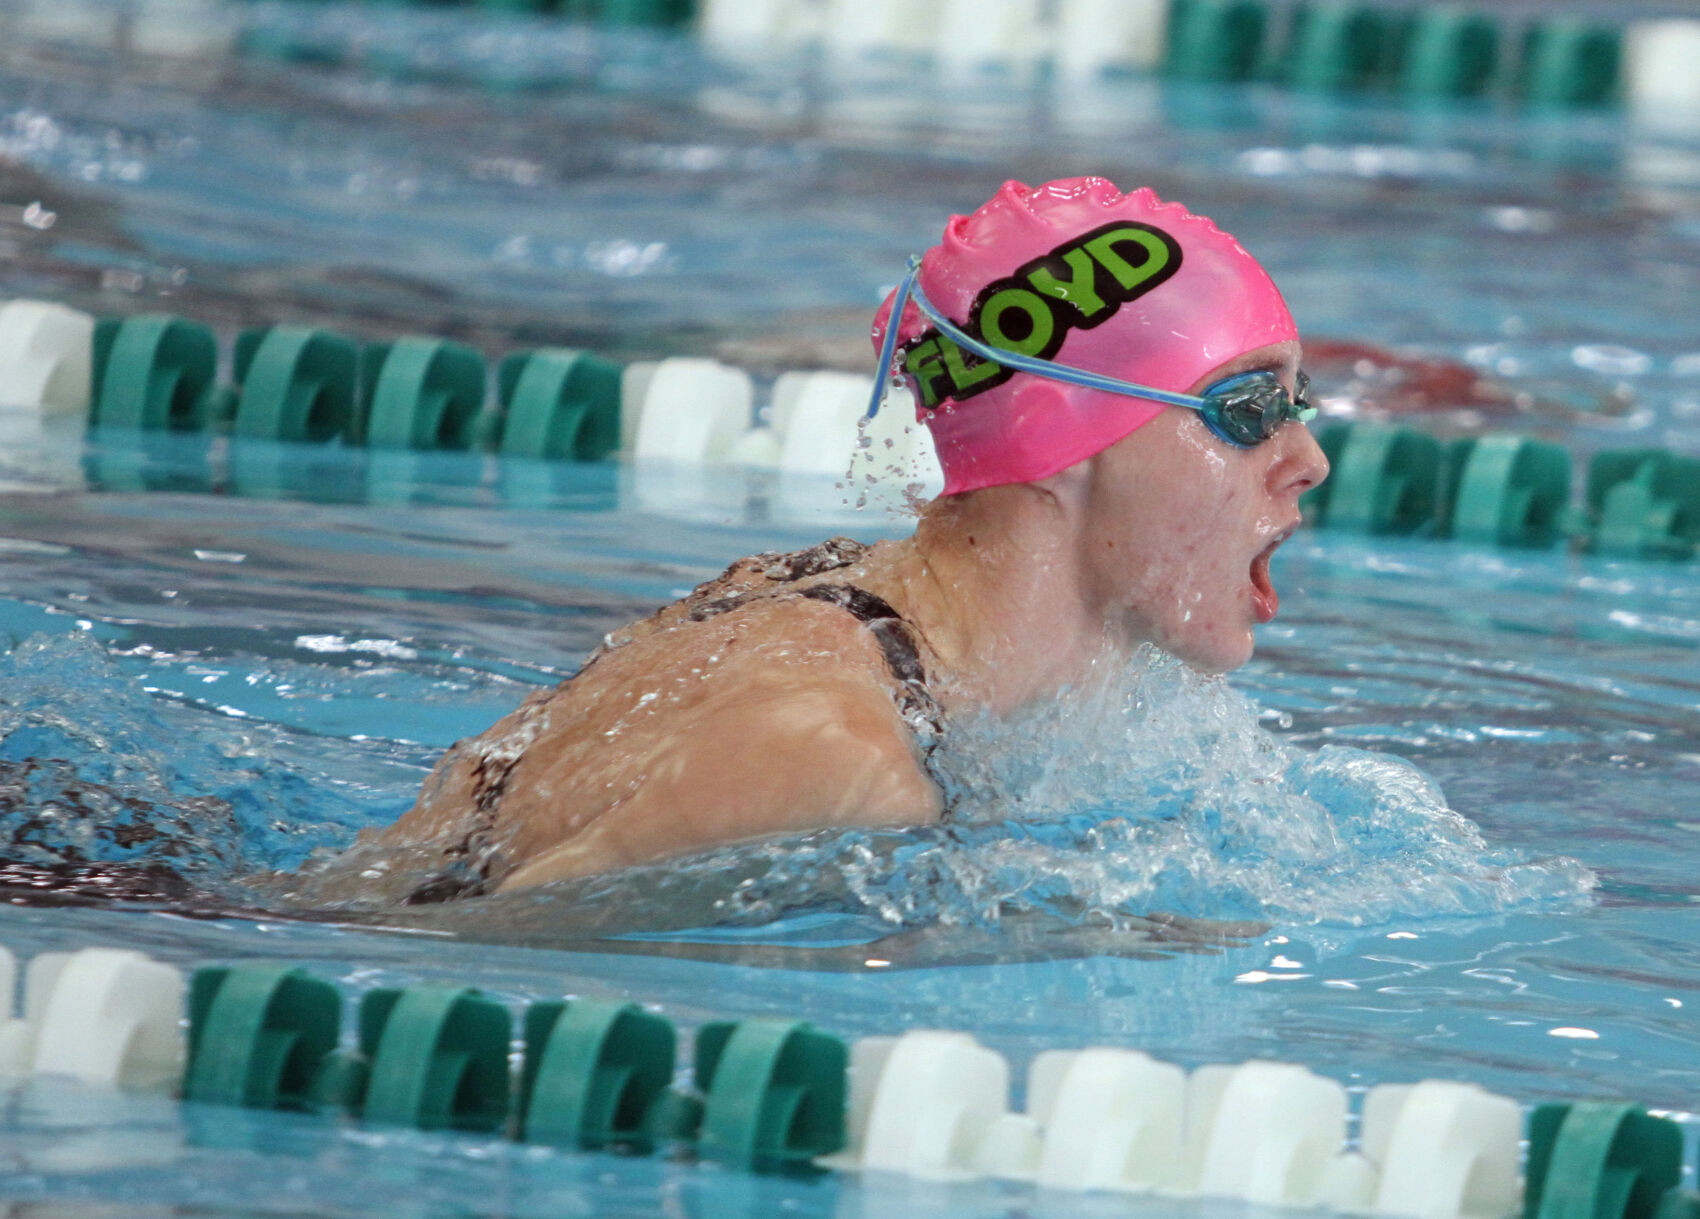 NTSPY Awards: Highlanders and Red Devil Compete for Top Girls’ Swimmer Title